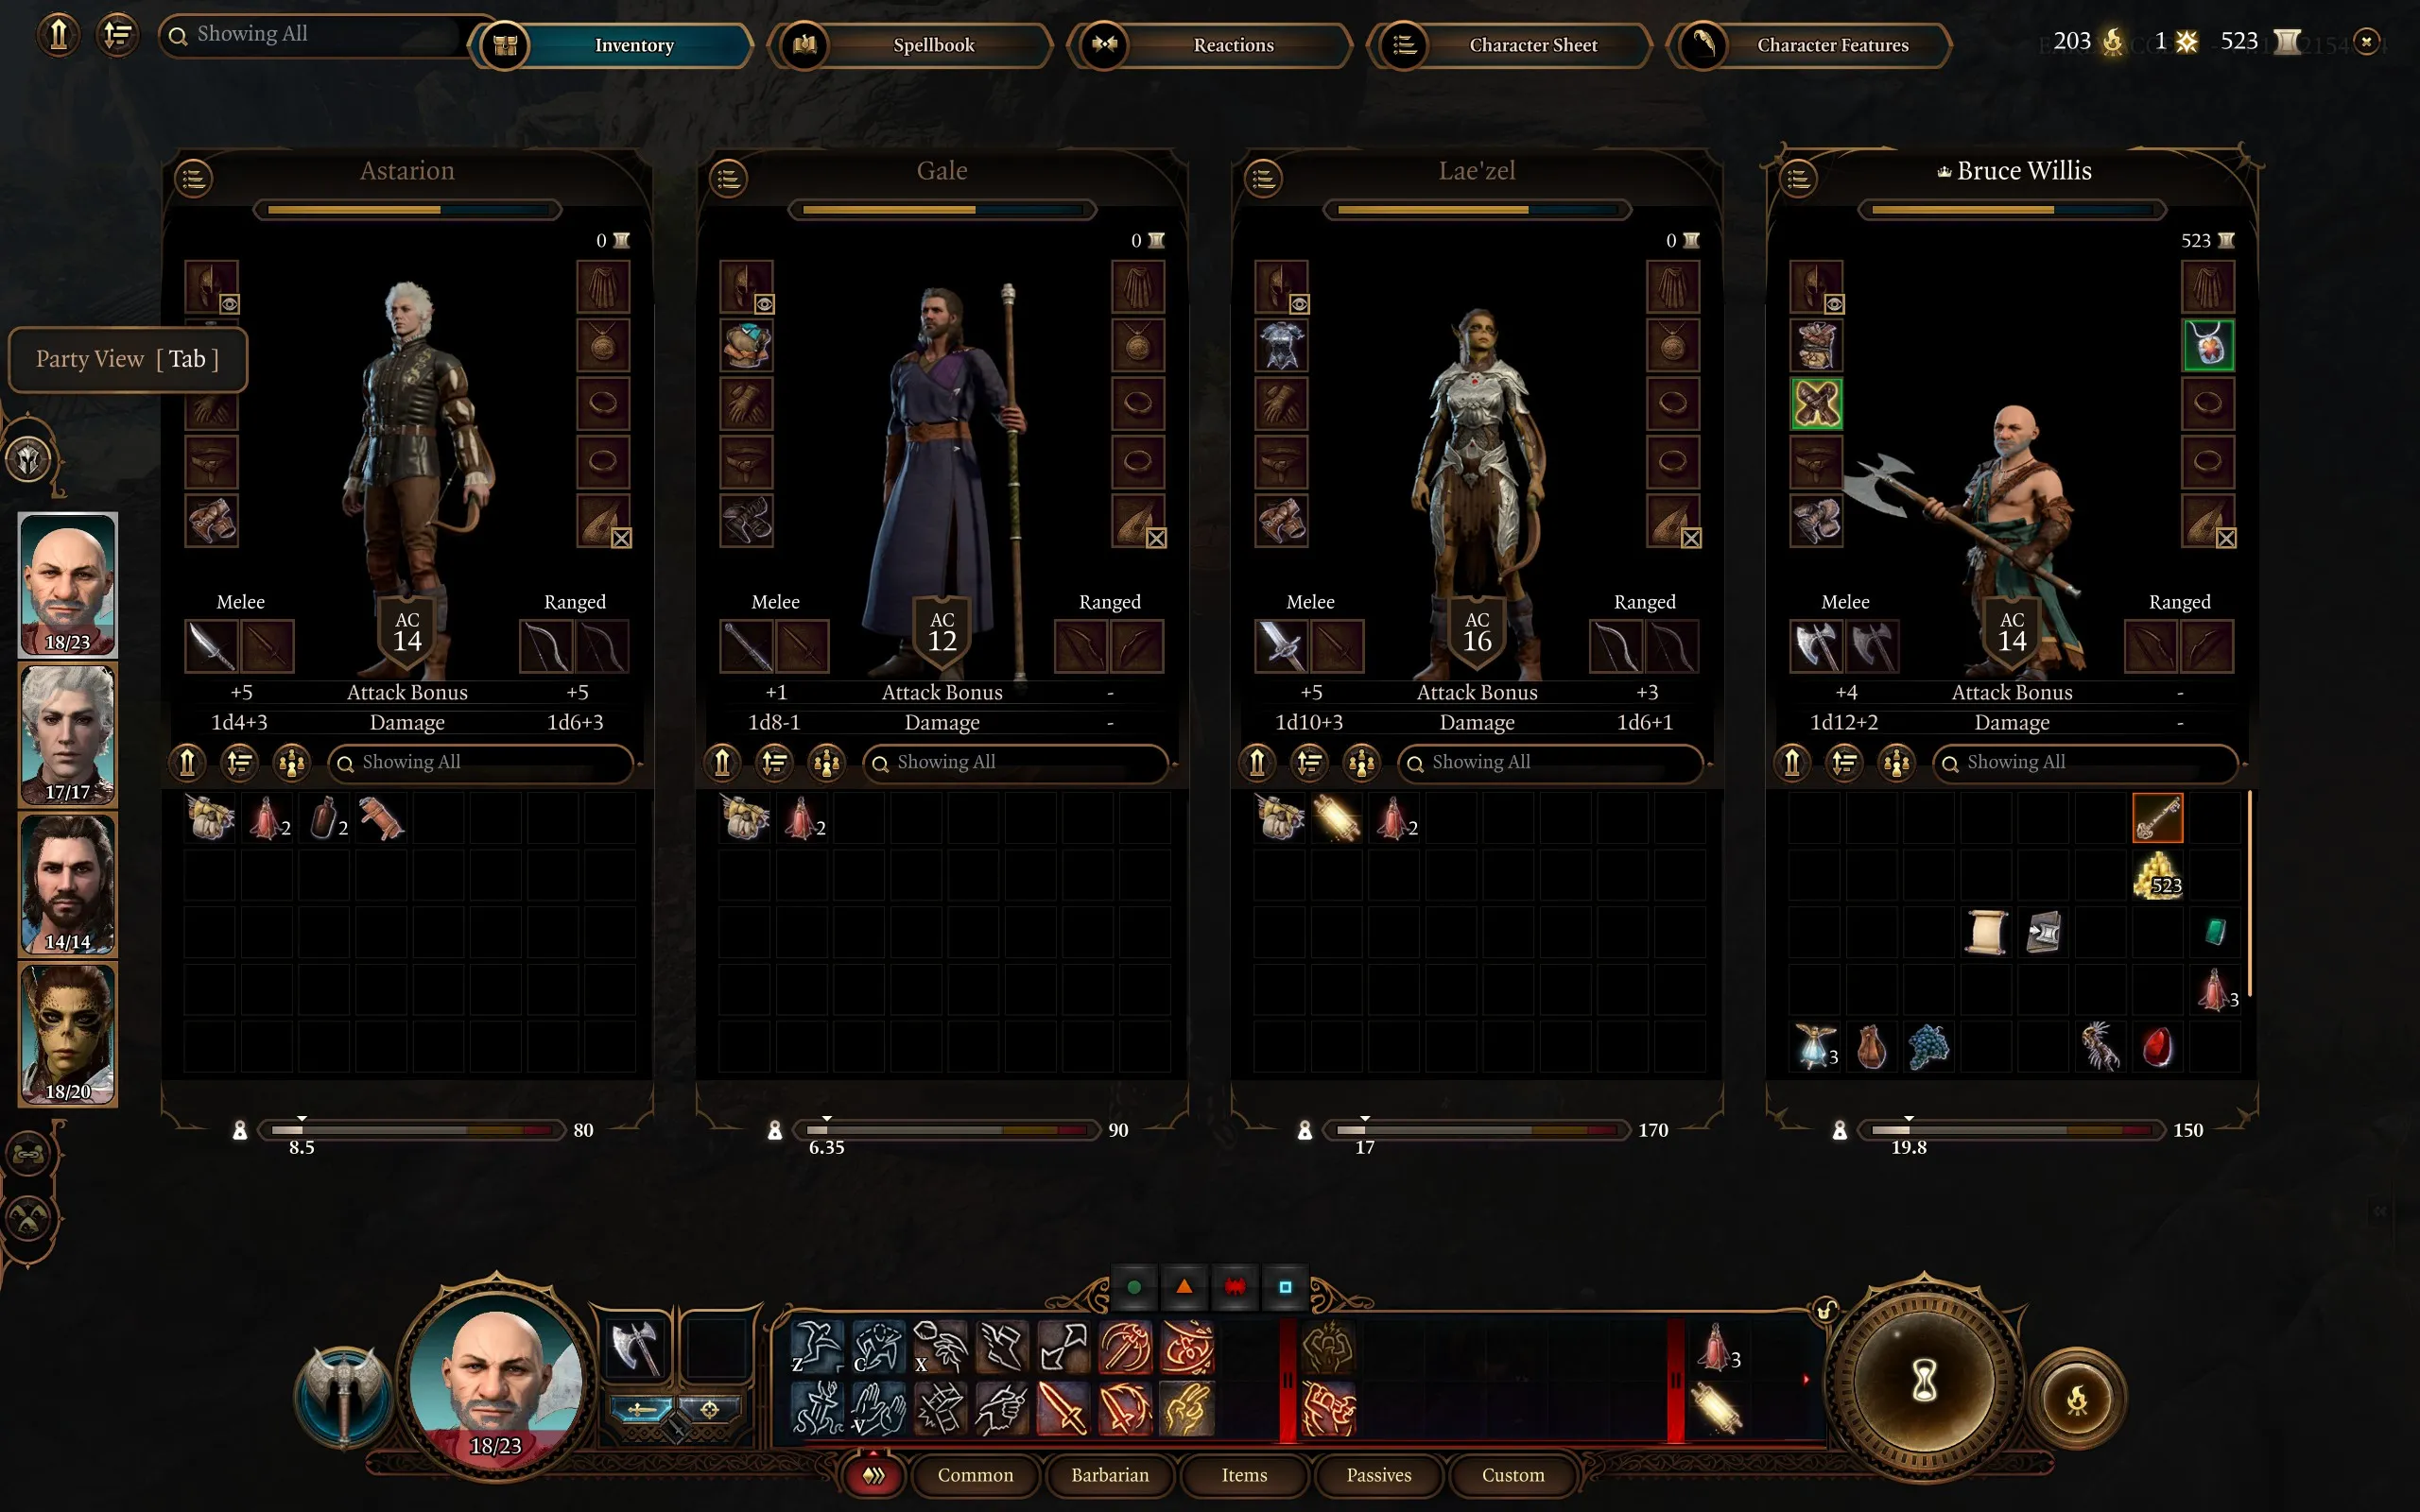 Baldur’s Gate 3: An image of the party inventory screen, showing all four party members’ inventories